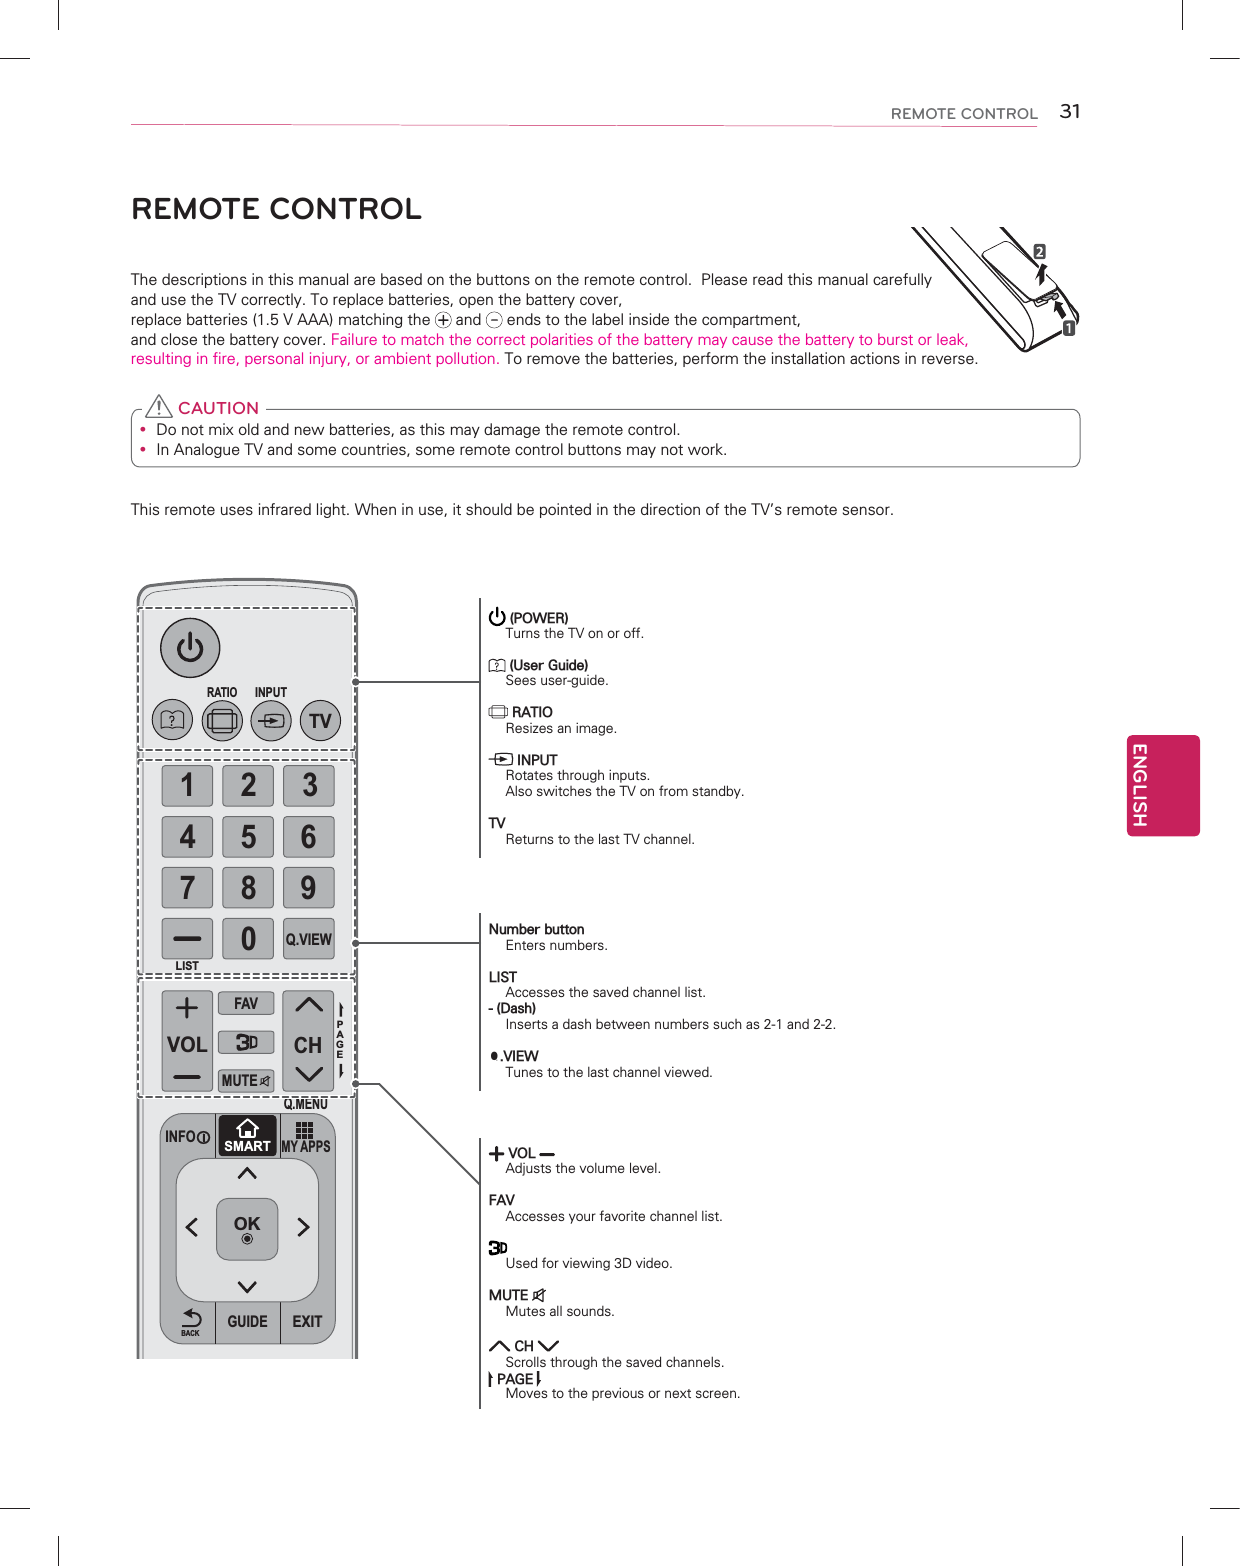 ENGLISH31REMOTE CONTROLREMOTE CONTROLThe descriptions in this manual are based on the buttons on the remote control.  Please read this manual carefully and use the TV correctly. To replace batteries, open the battery cover,  replace batteries (1.5 V AAA) matching the   and   ends to the label inside the compartment, and close the battery cover. Failure to match the correct polarities of the battery may cause the battery to burst or leak, resulting in fire, personal injury, or ambient pollution. To remove the batteries, perform the installation actions in reverse.y Do not mix old and new batteries, as this may damage the remote control.y In Analogue TV and some countries, some remote control buttons may not work. CAUTION This remote uses infrared light. When in use, it should be pointed in the direction of the TV’s remote sensor.1234567809MY APPSTVSMARTCHVOLPAGERATIOINPUTFAVMUTELISTQ.VIEWEXITGUIDEBACKOKQ.MENUINFO (POWER)Turns the TV on or off. (User Guide)Sees user-guide. RATIOResizes an image. INPUTRotates through inputs. Also switches the TV on from standby.TVReturns to the last TV channel.Number buttonEnters numbers.LISTAccesses the saved channel list.- (Dash)Inserts a dash between numbers such as 2-1 and 2-2.Q.VIEWTunes to the last channel viewed. VOL Adjusts the volume level.FAVAccesses your favorite channel list.Used for viewing 3D video.MUTE Mutes all sounds. CH Scrolls through the saved channels. PAGE Moves to the previous or next screen.